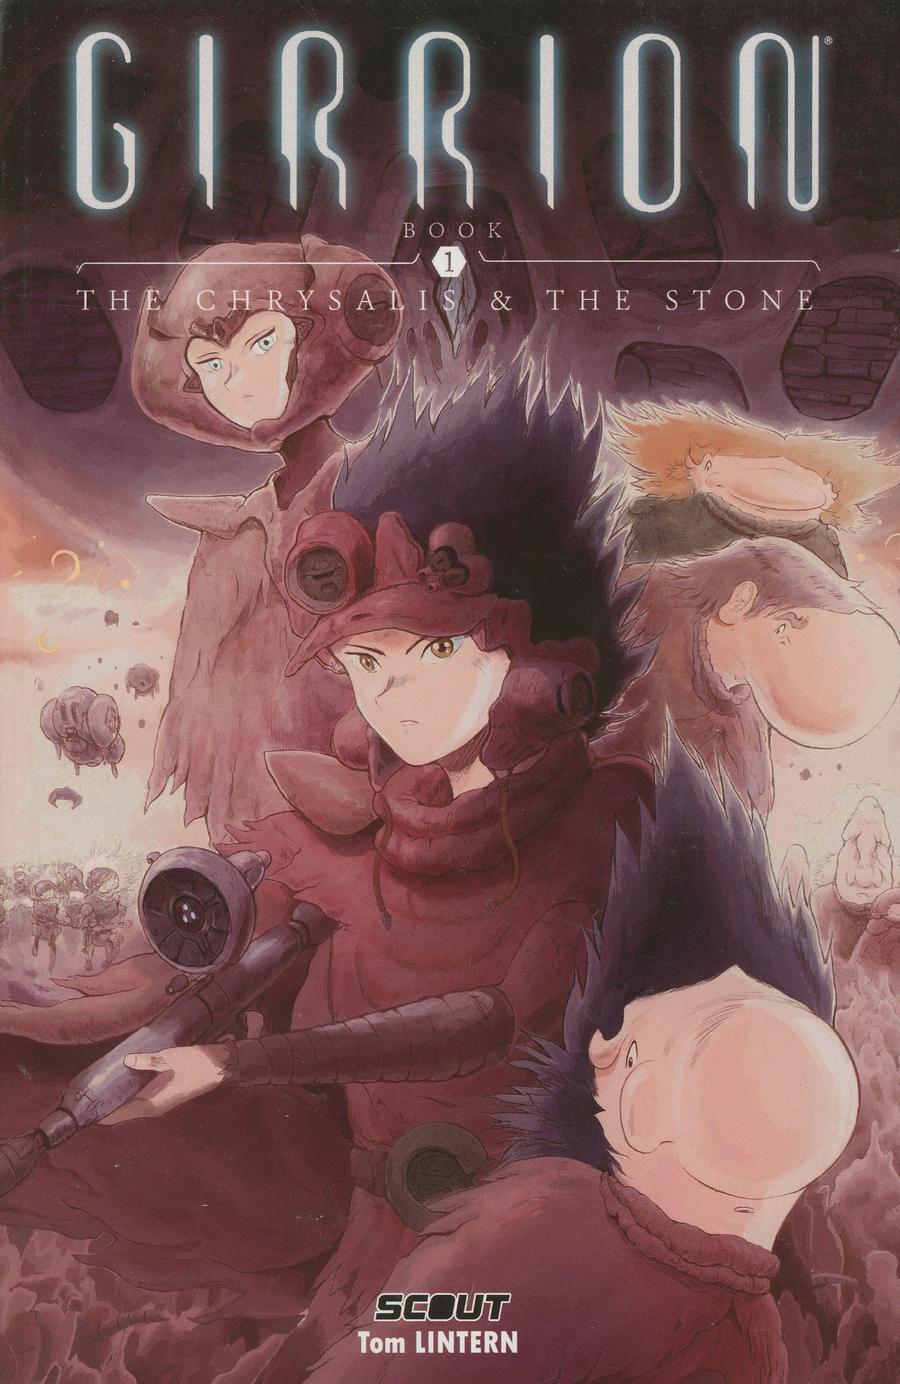 Girrion Vol 1 The Chrysalis And The Stone TP